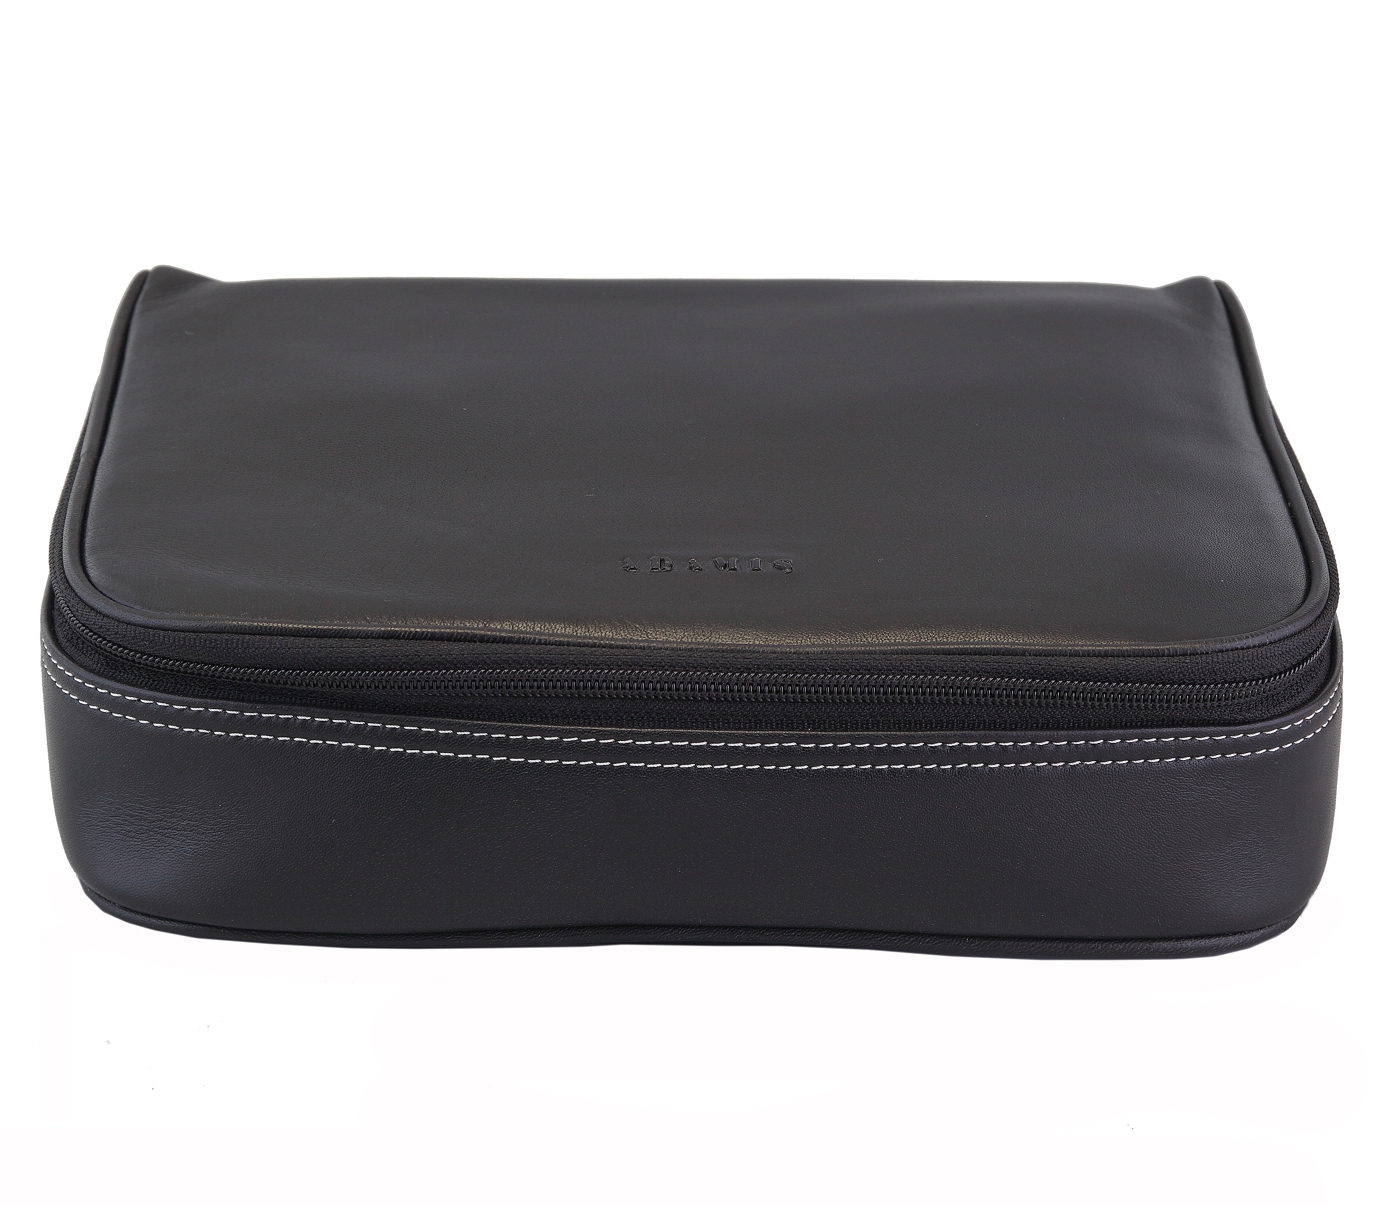 SC5--Unisex Wash & Toiletry travel Bag in Genuine Leather - Black